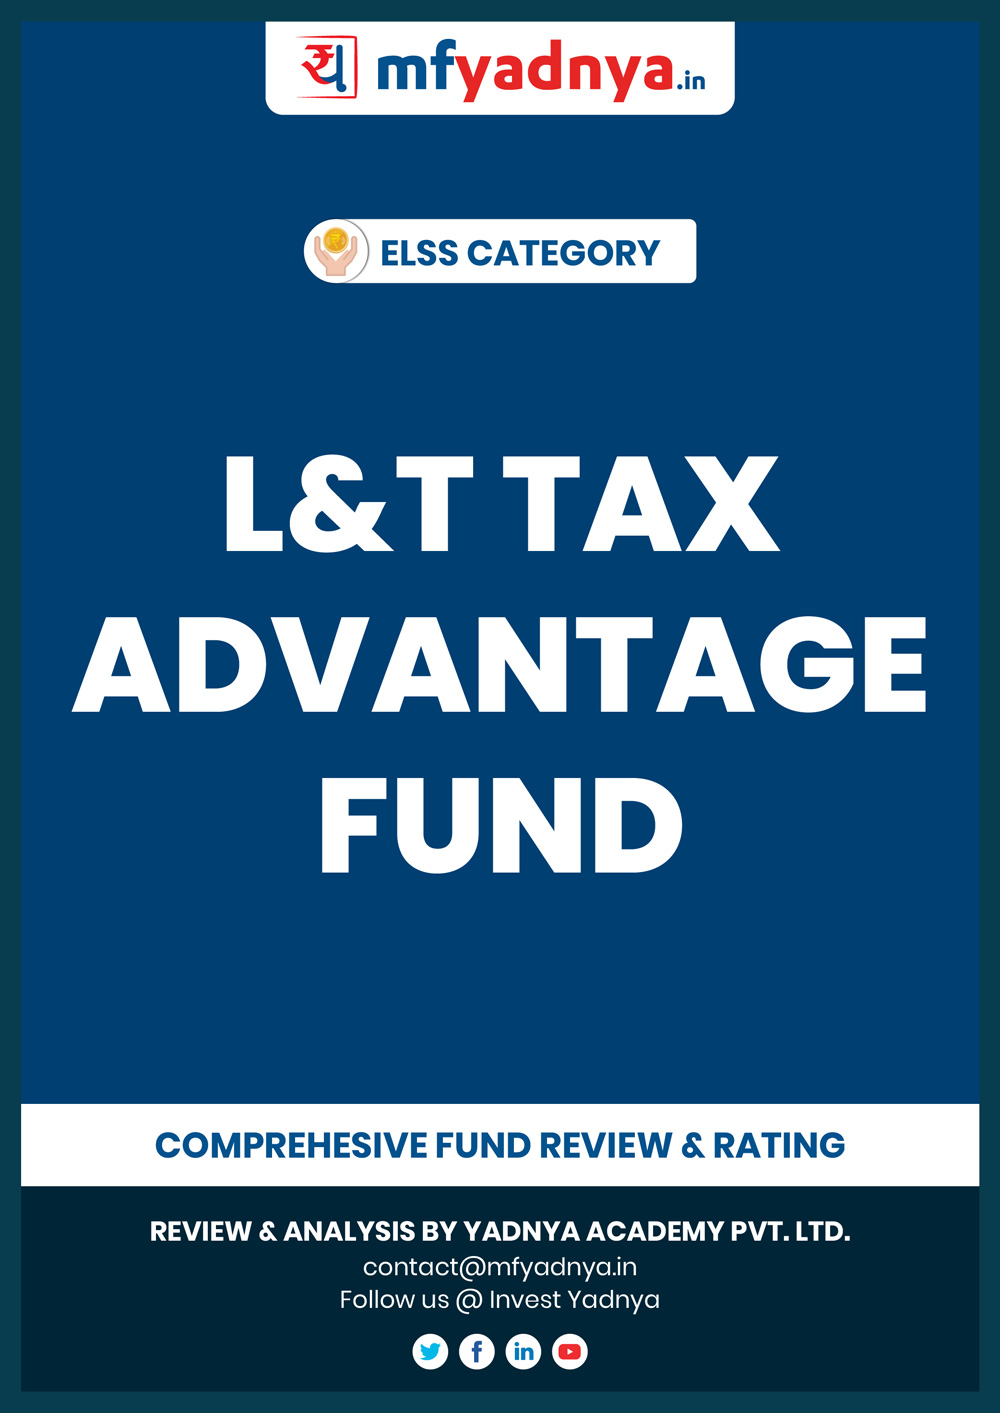 This e-book offers a comprehensive L&T mutual fund review of ELSS category. It reviews the fund's return, ratio, allocation etc. ✔ Detailed Mutual Fund Analysis ✔ Latest Research Reports